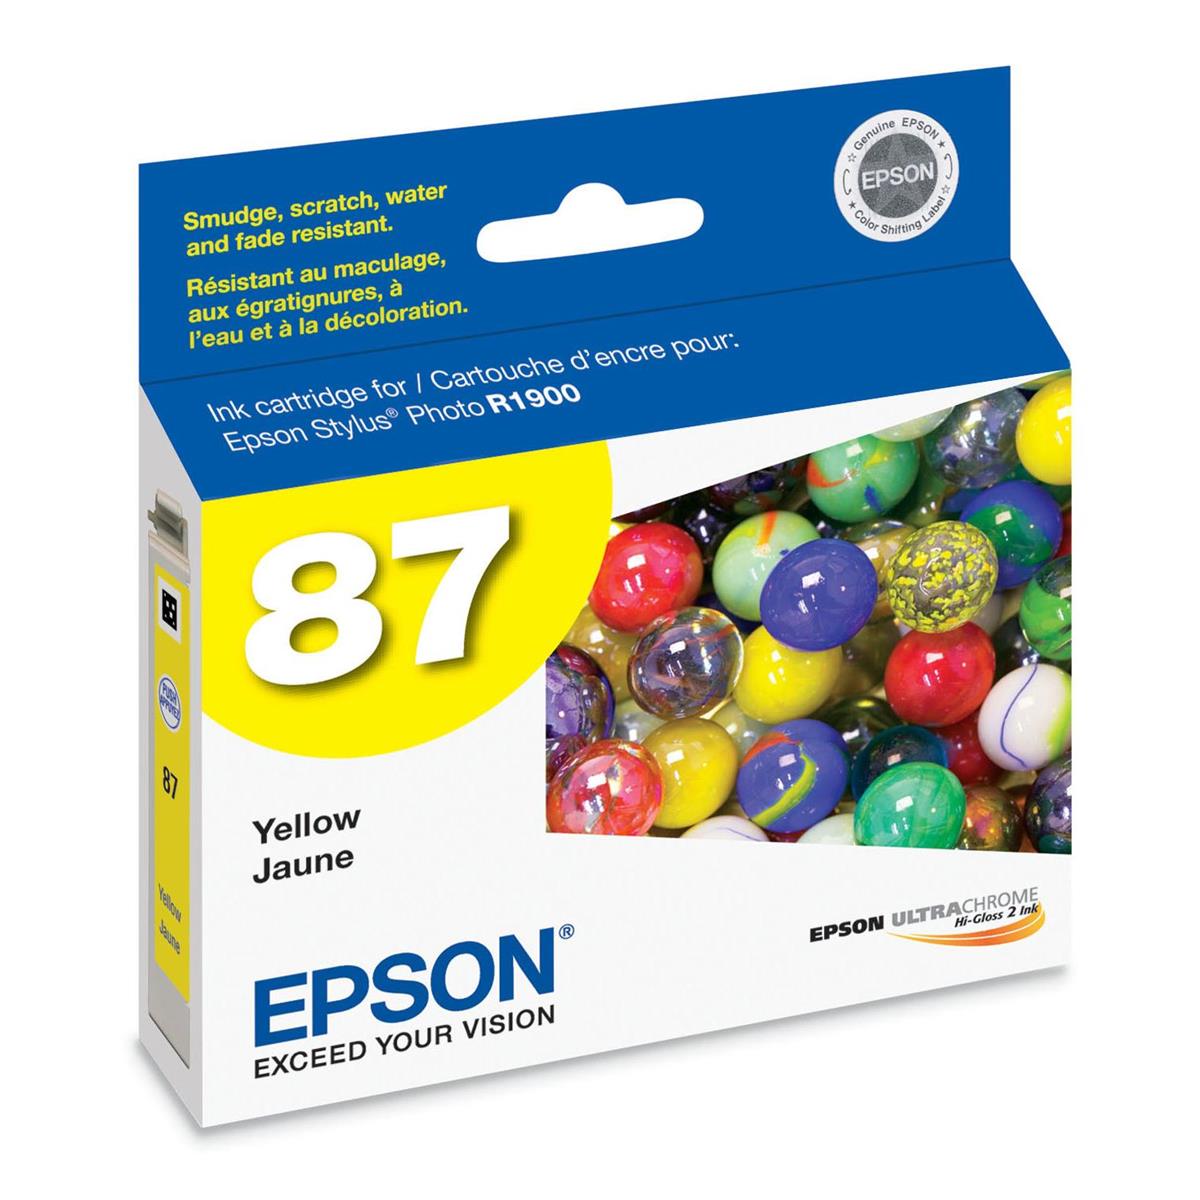 Image of Epson T087420 Cartridge for Stylus R1900